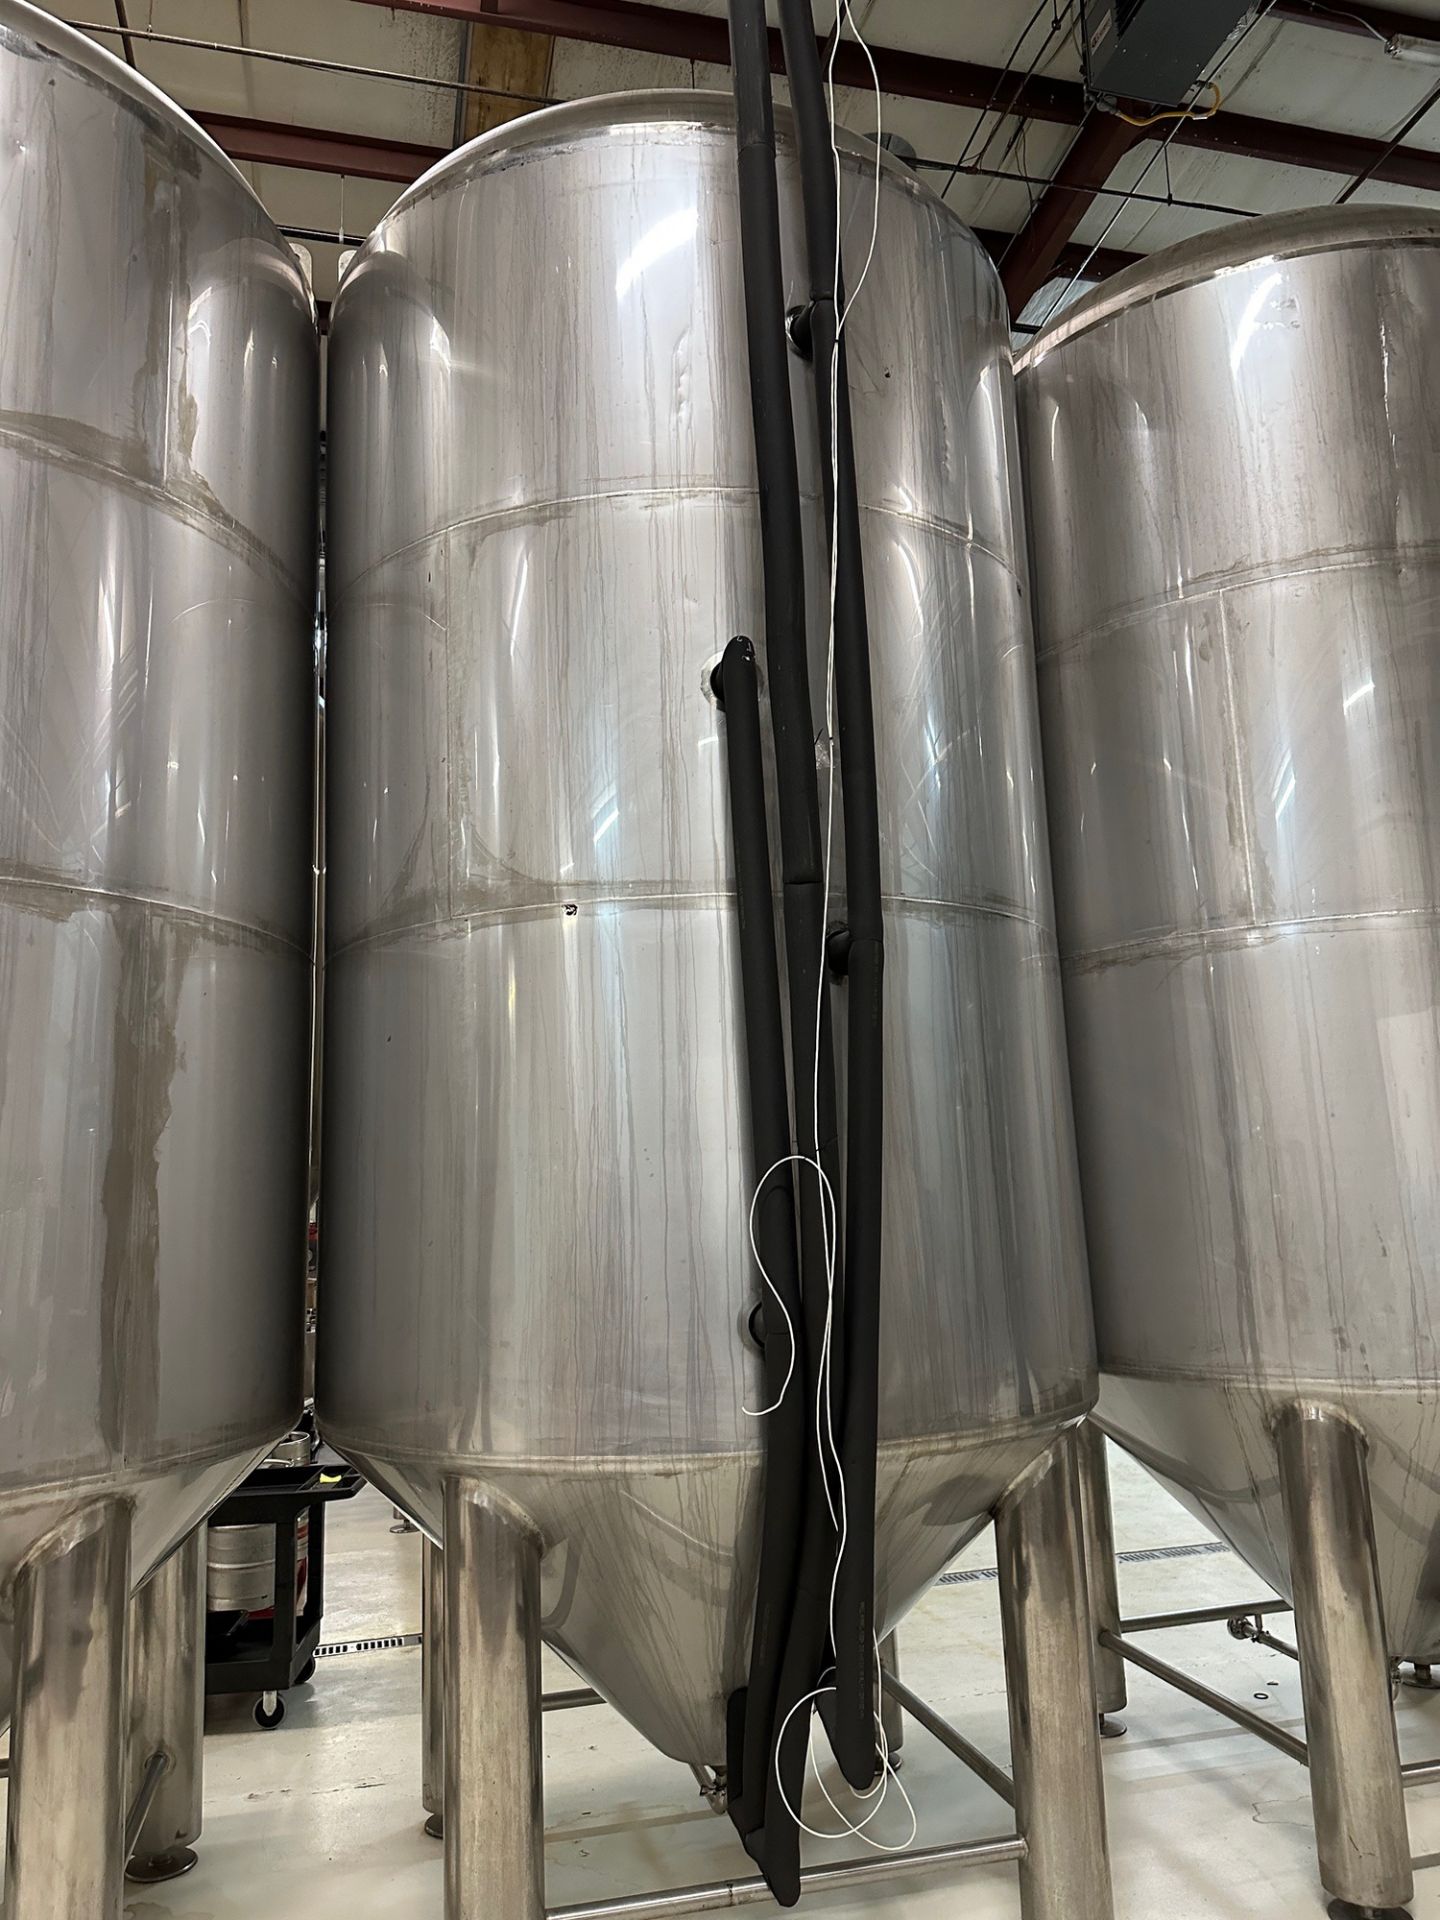 100 BBL Stainless Steel Fermentation Tank - Cone Bottom, Glycol Jacketed, Manway, Z | Rig Fee $1850 - Image 2 of 4